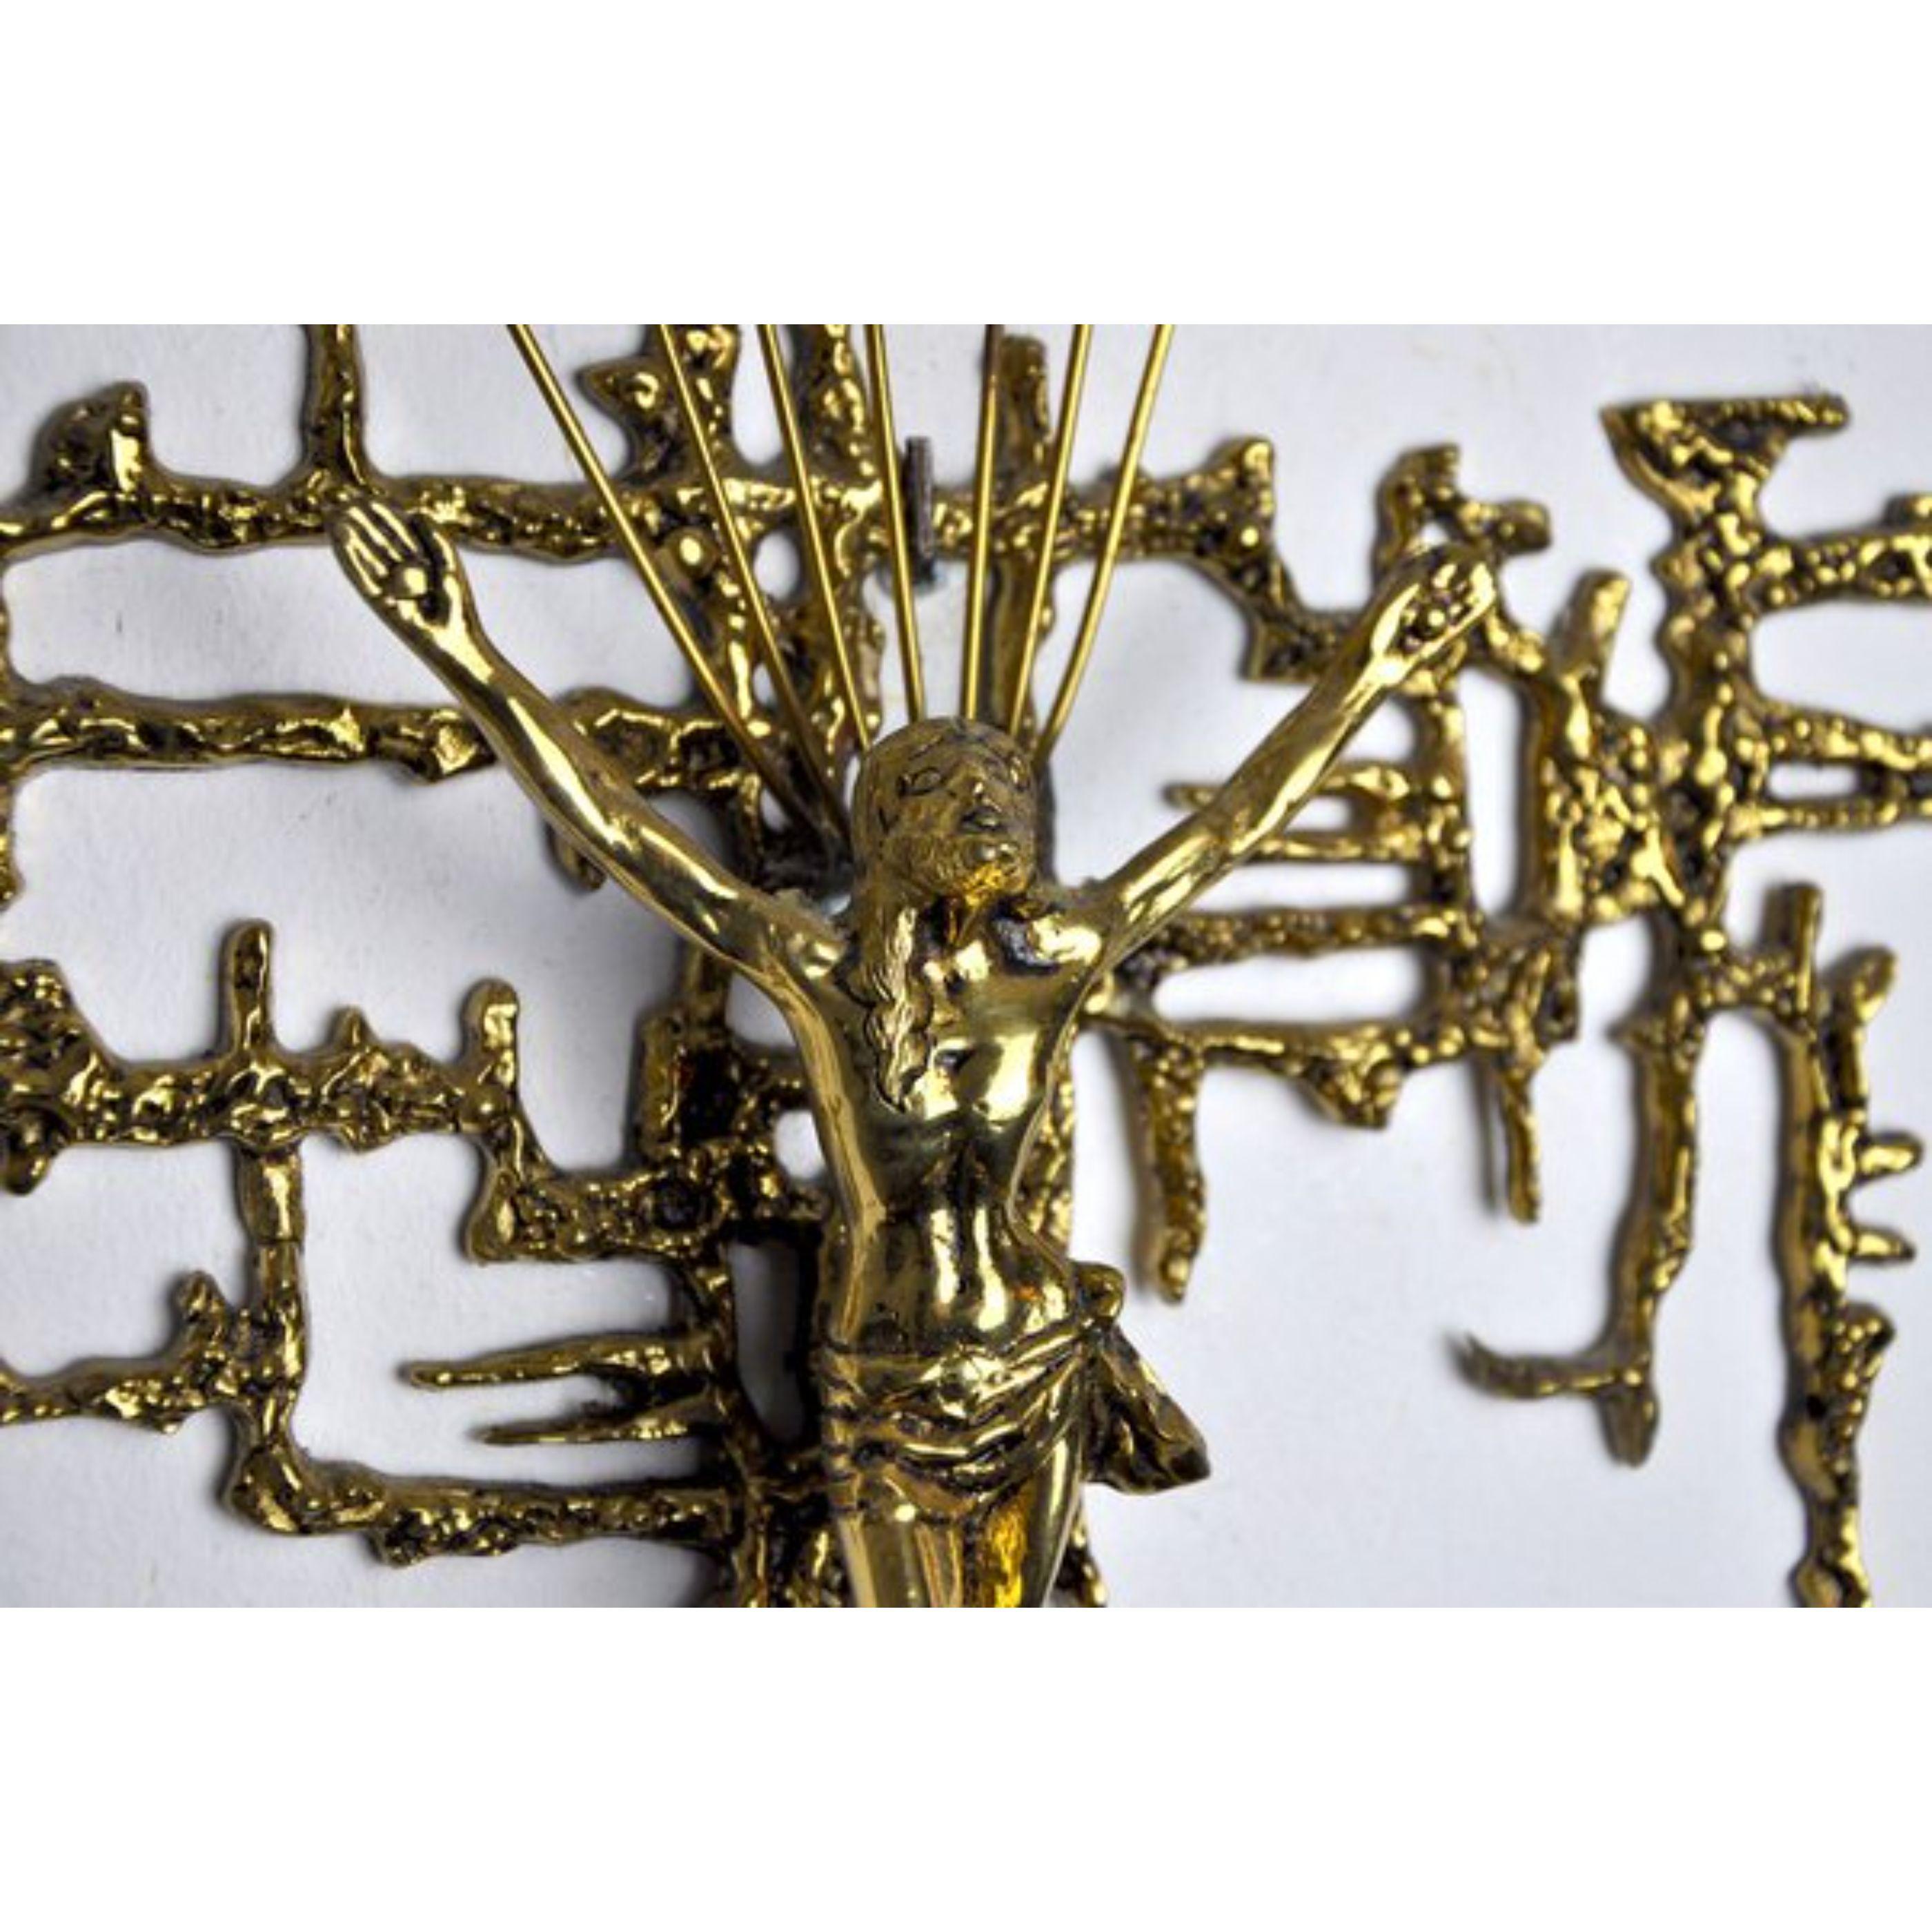 Exceptional reproduction in brass of size XL of 